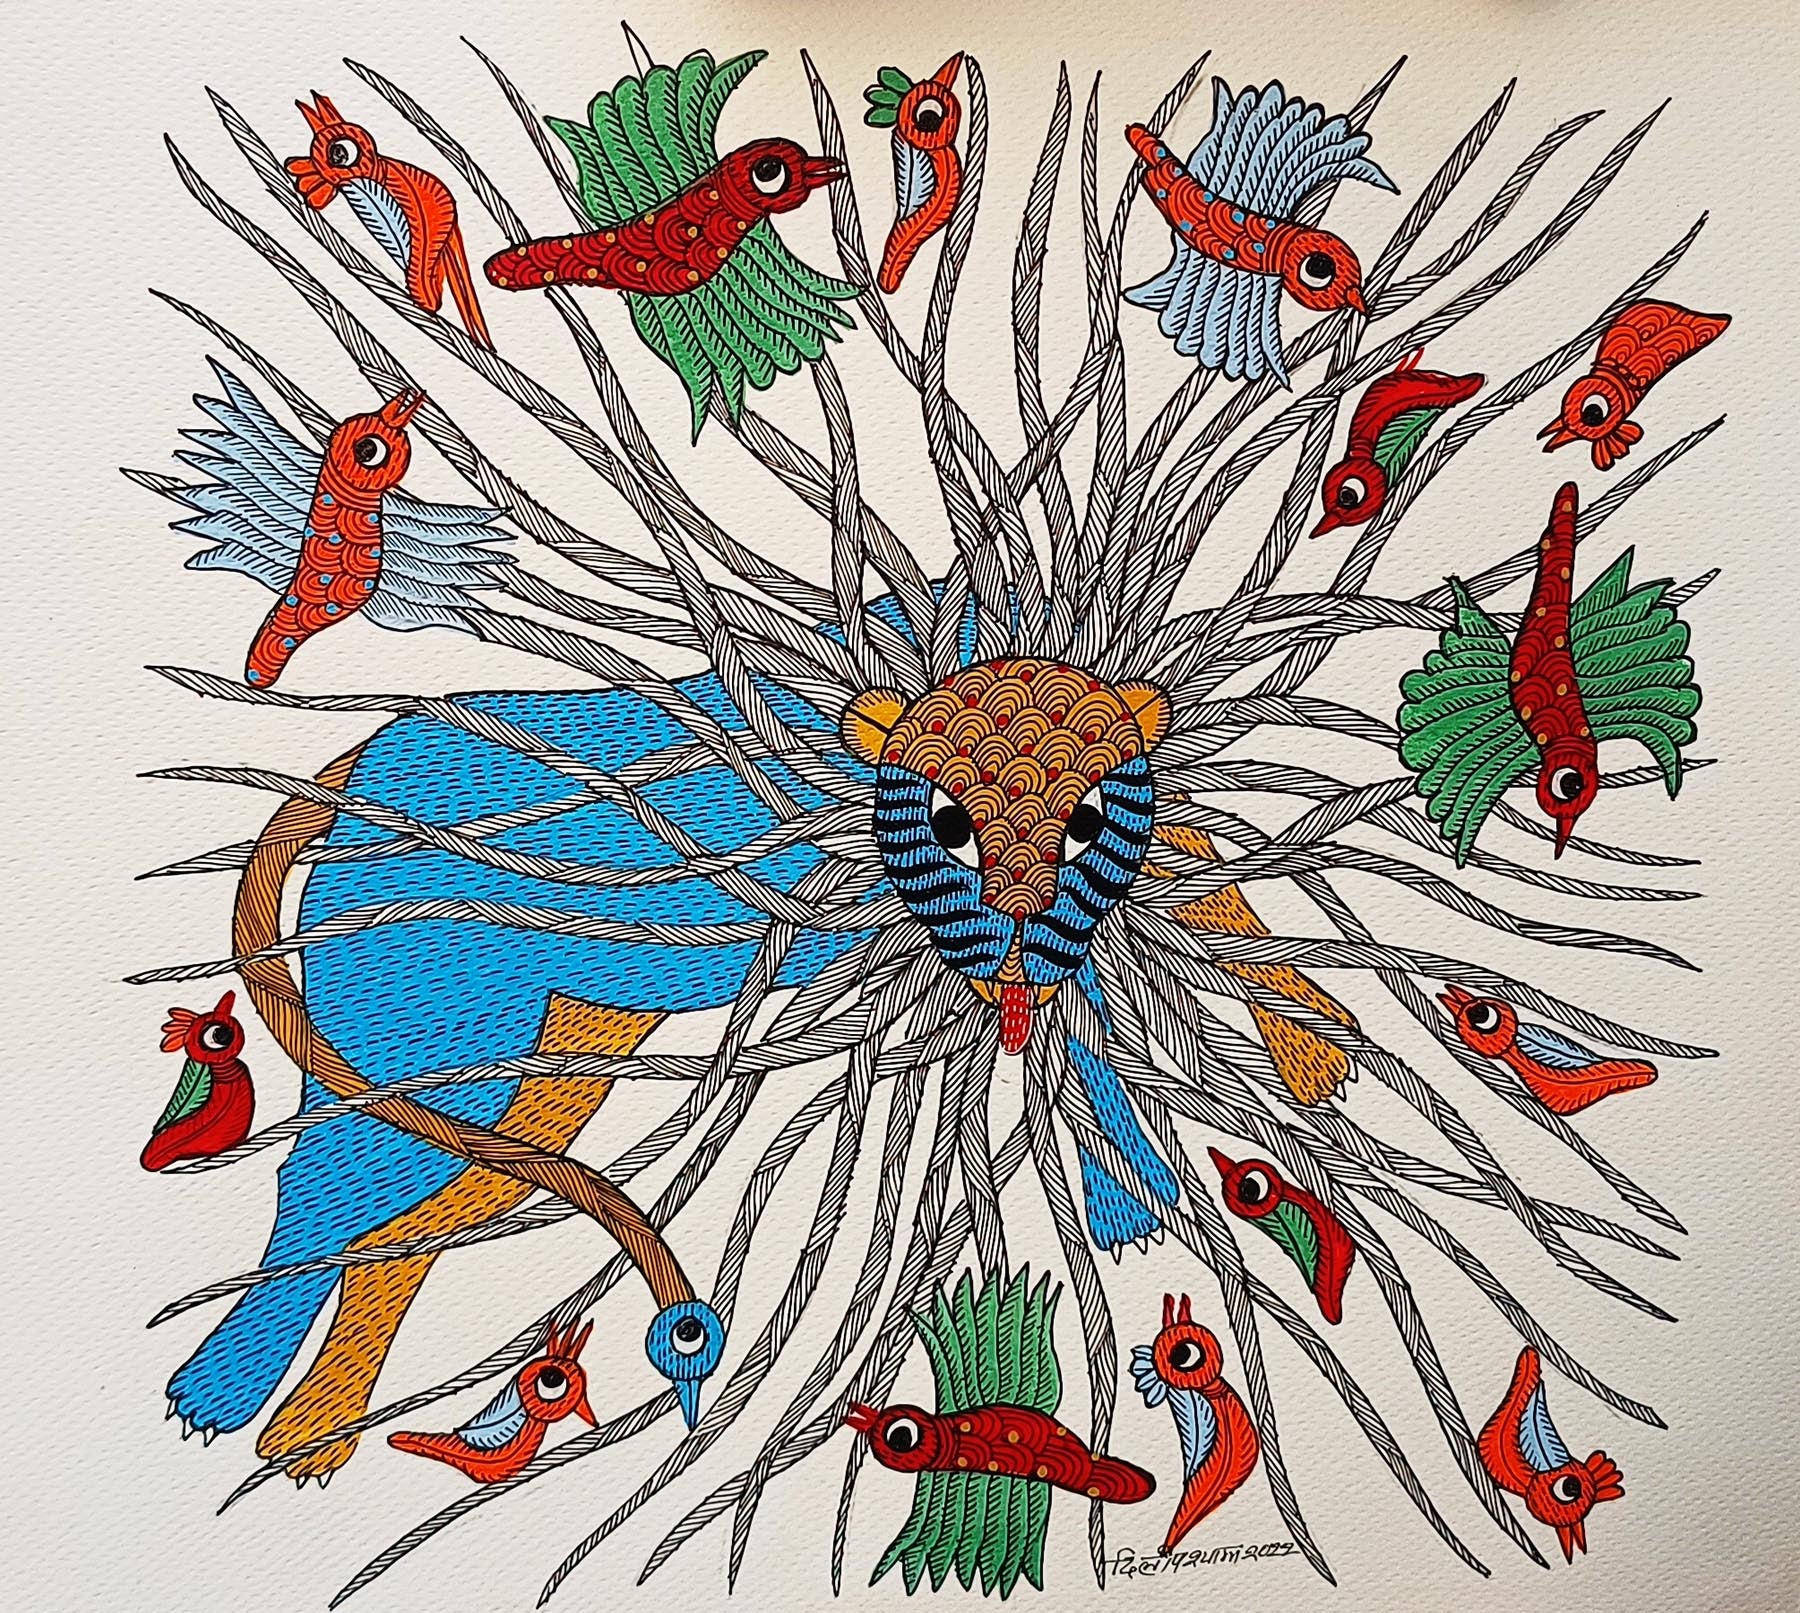 The King of the Wild By tribal Gond artist, Dilip Shyam